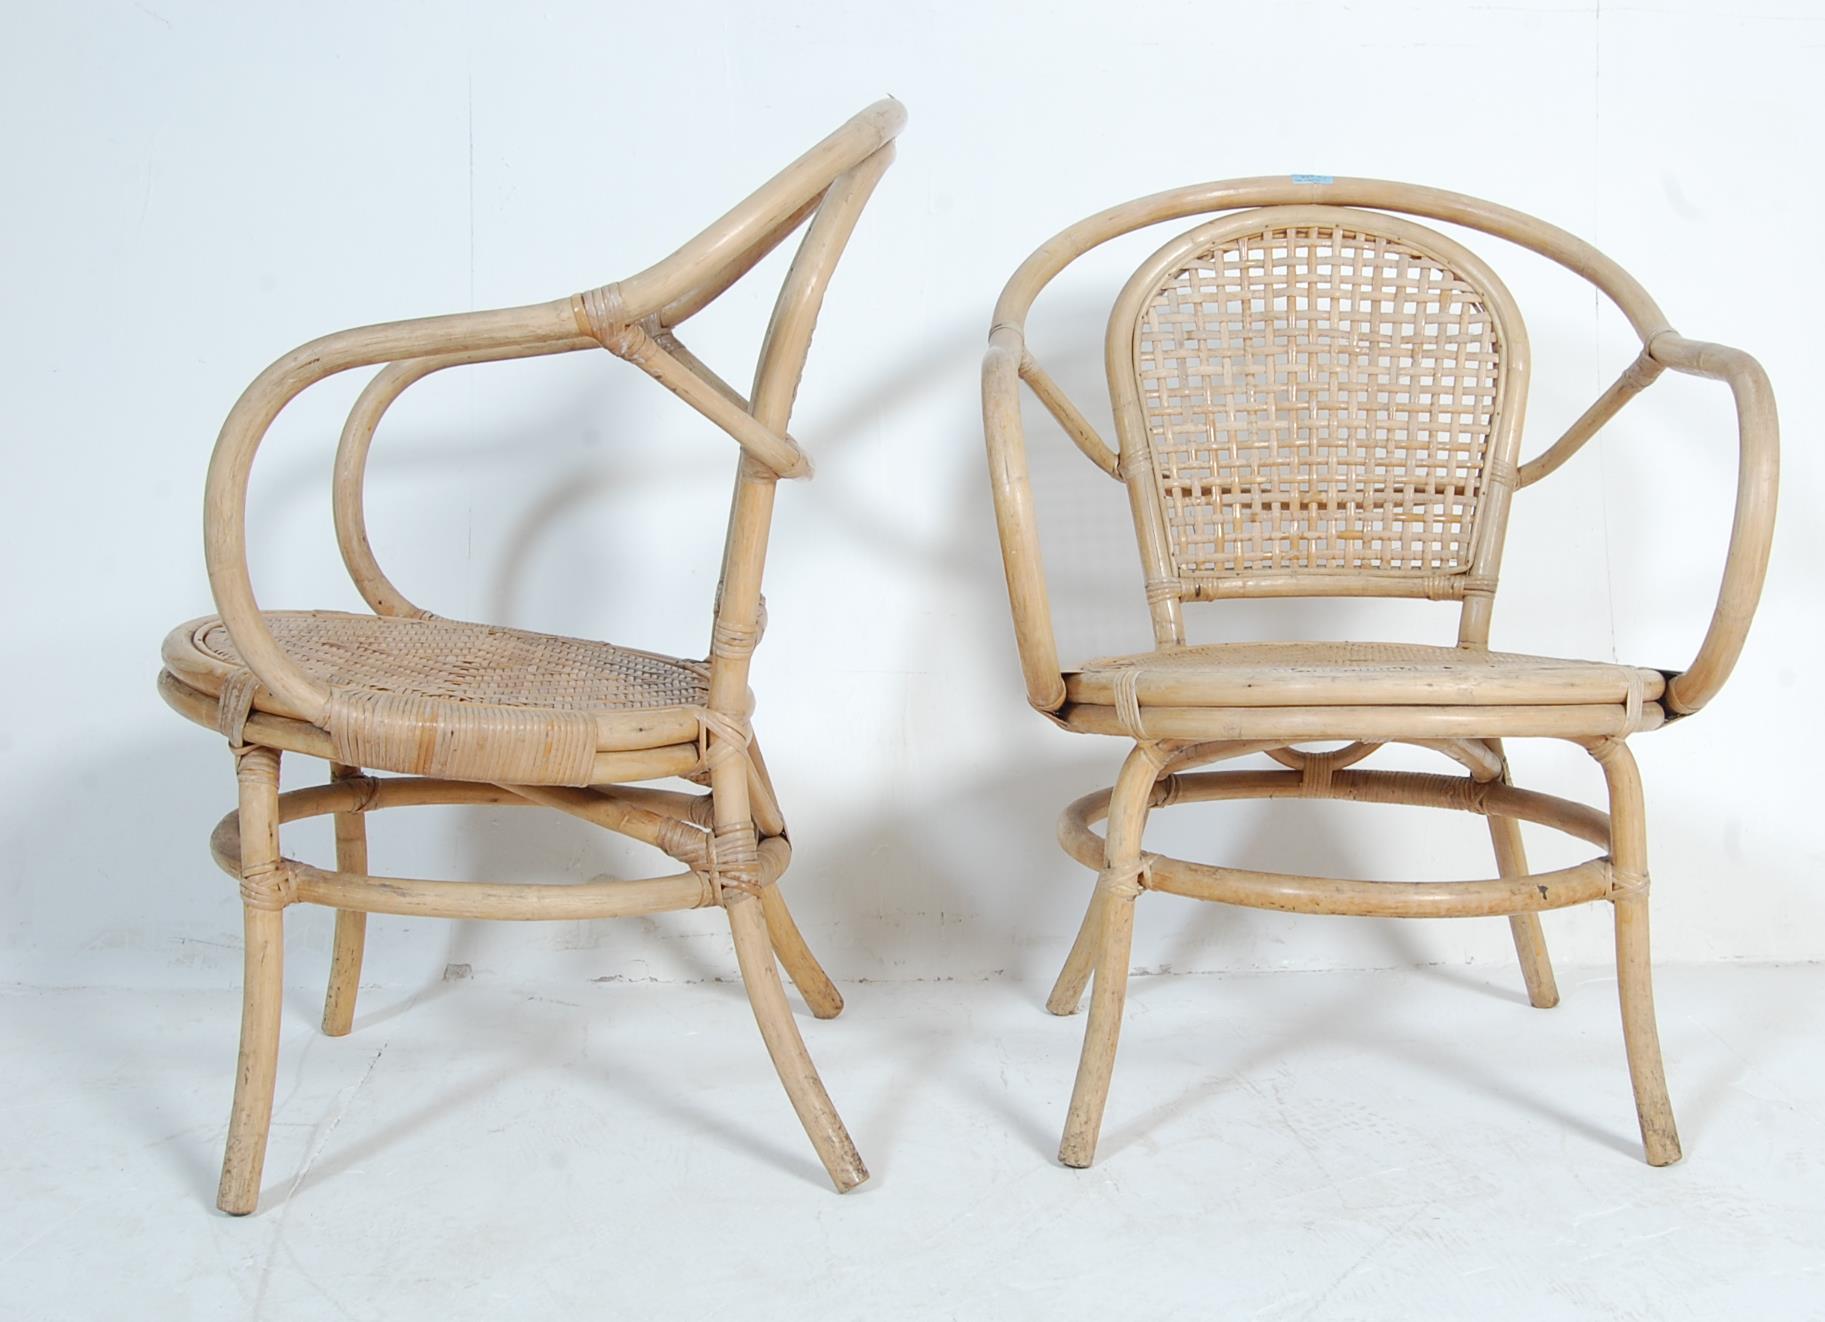 FIVE VINTAGE RETRO BENT BAMBOO CONSERVATORY CHAIRS - Image 3 of 4